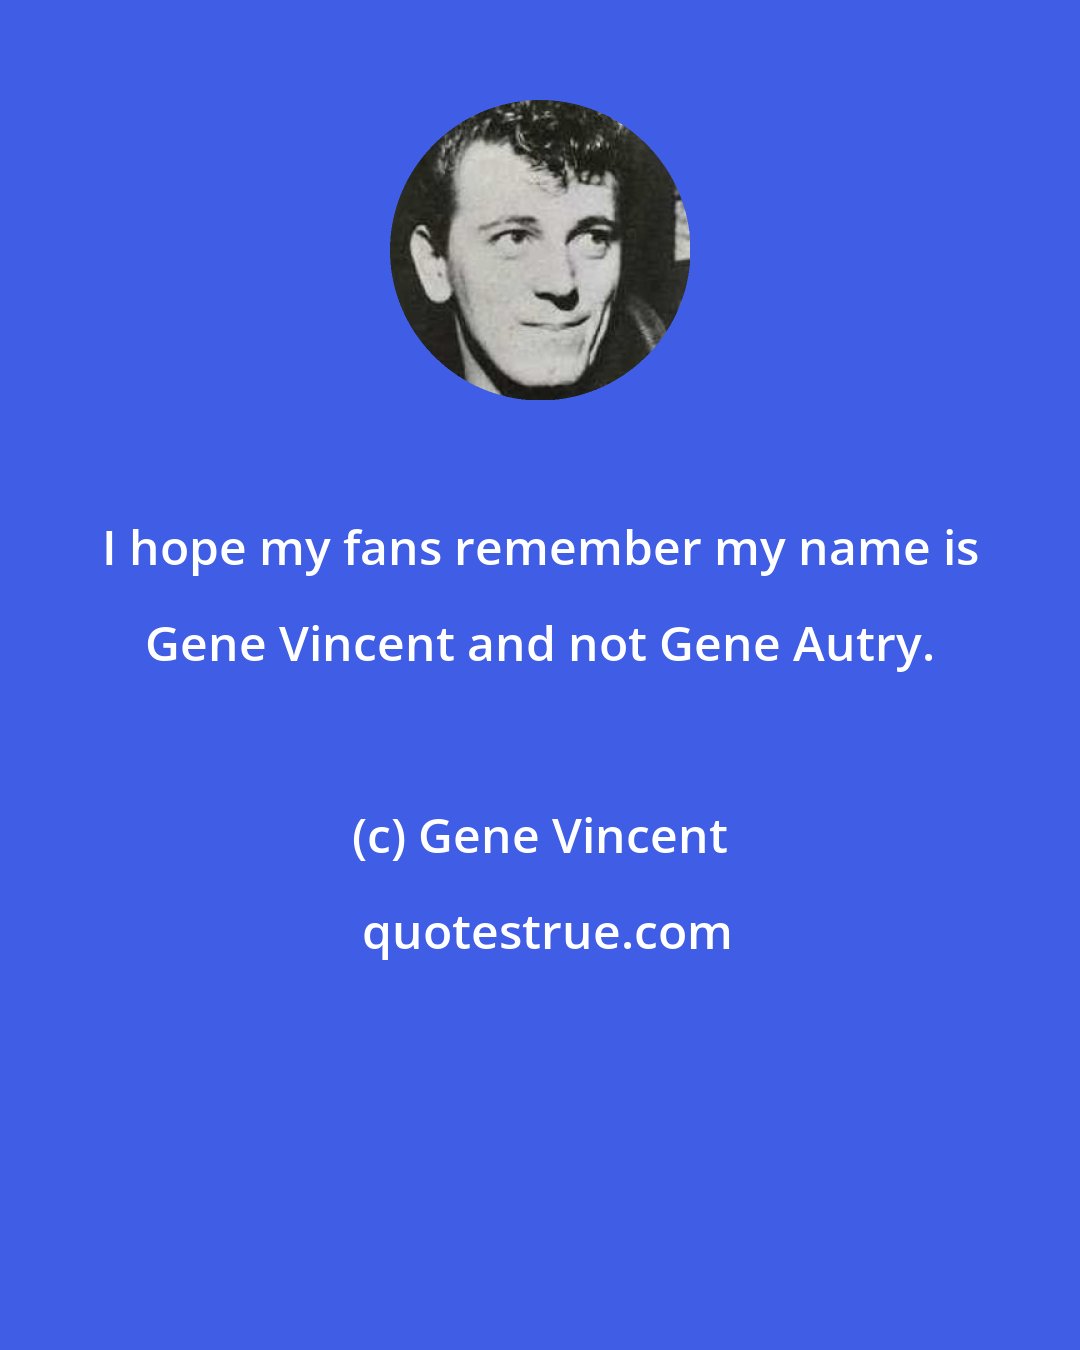 Gene Vincent: I hope my fans remember my name is Gene Vincent and not Gene Autry.